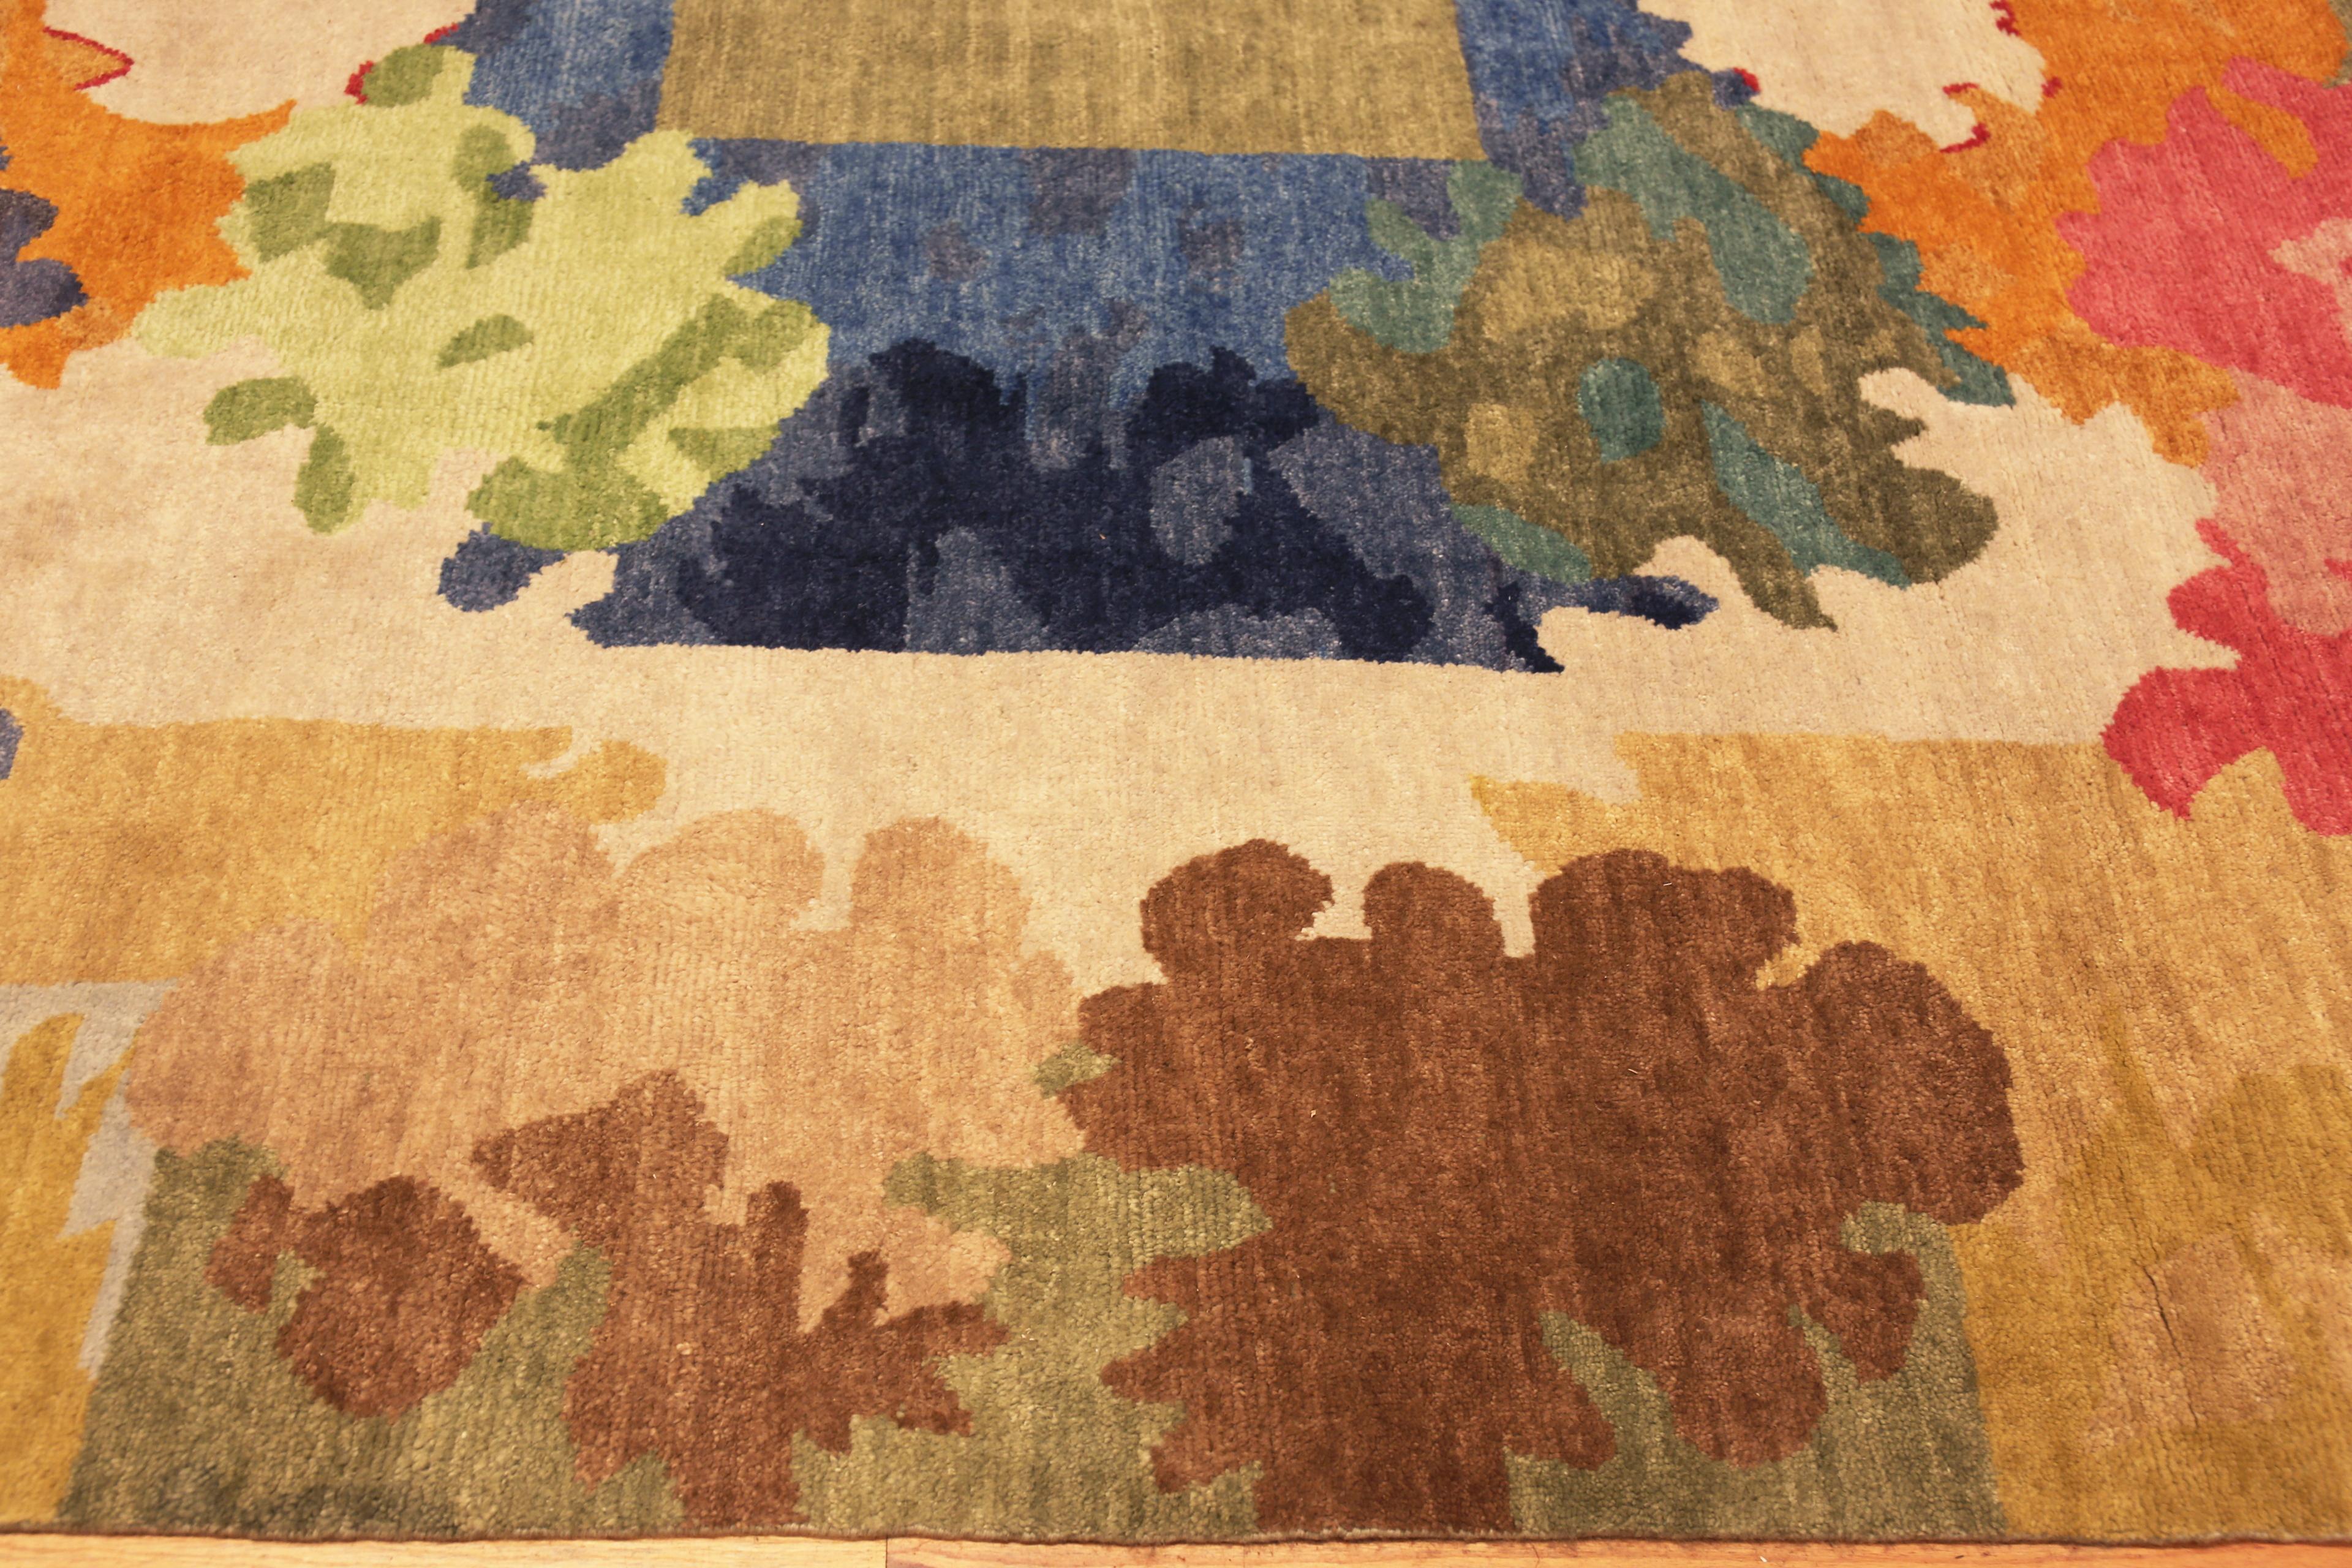 Colorful Modern Swedish Design Rug, Country of Origin: Modern India Rugs. Circa date: Modern. Size: 10 ft 1 in x 13 ft 10 in (3.07 m x 4.22 m)

